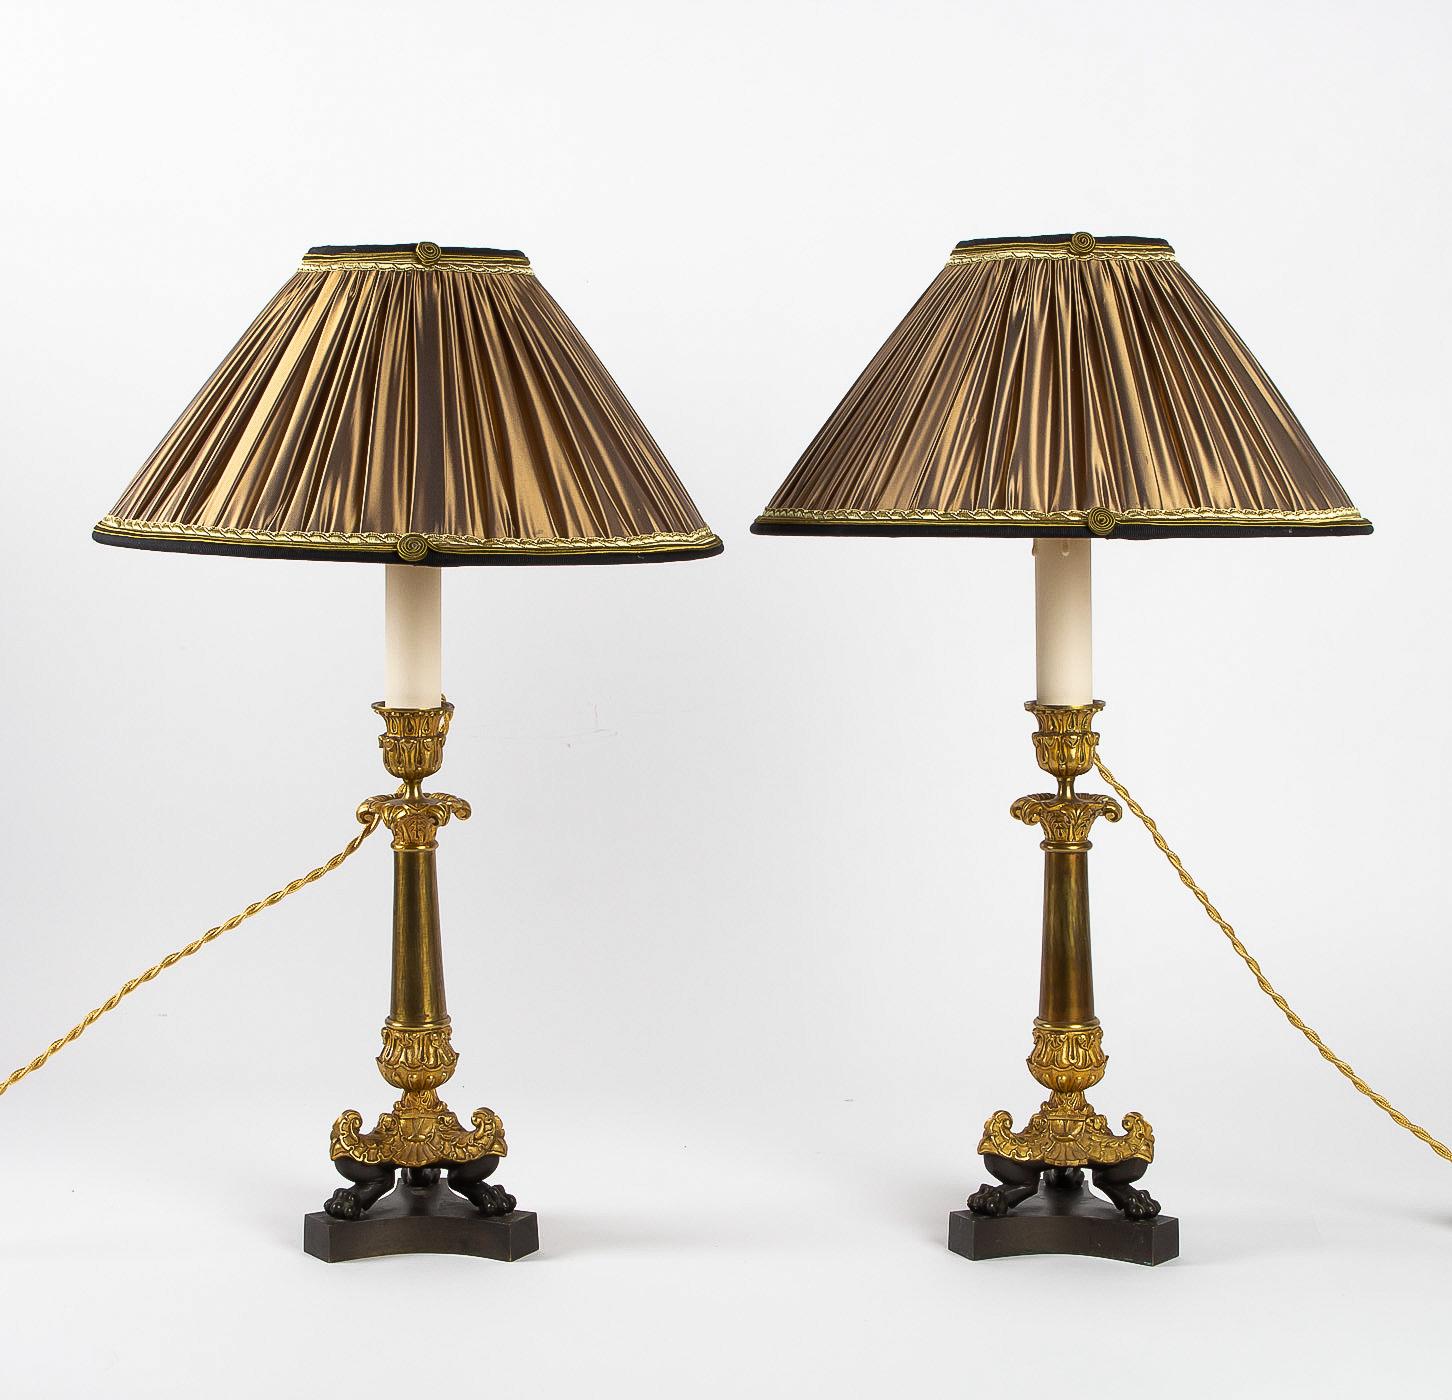 French Restoration period, converted in table lamps, pair of small bronze candlesticks.

An elegant et decorative pair of small chiseled gilt and patinated bronze candlesticks. Original gilt. Lovely antique chiseled decoration with Acanthus leaves